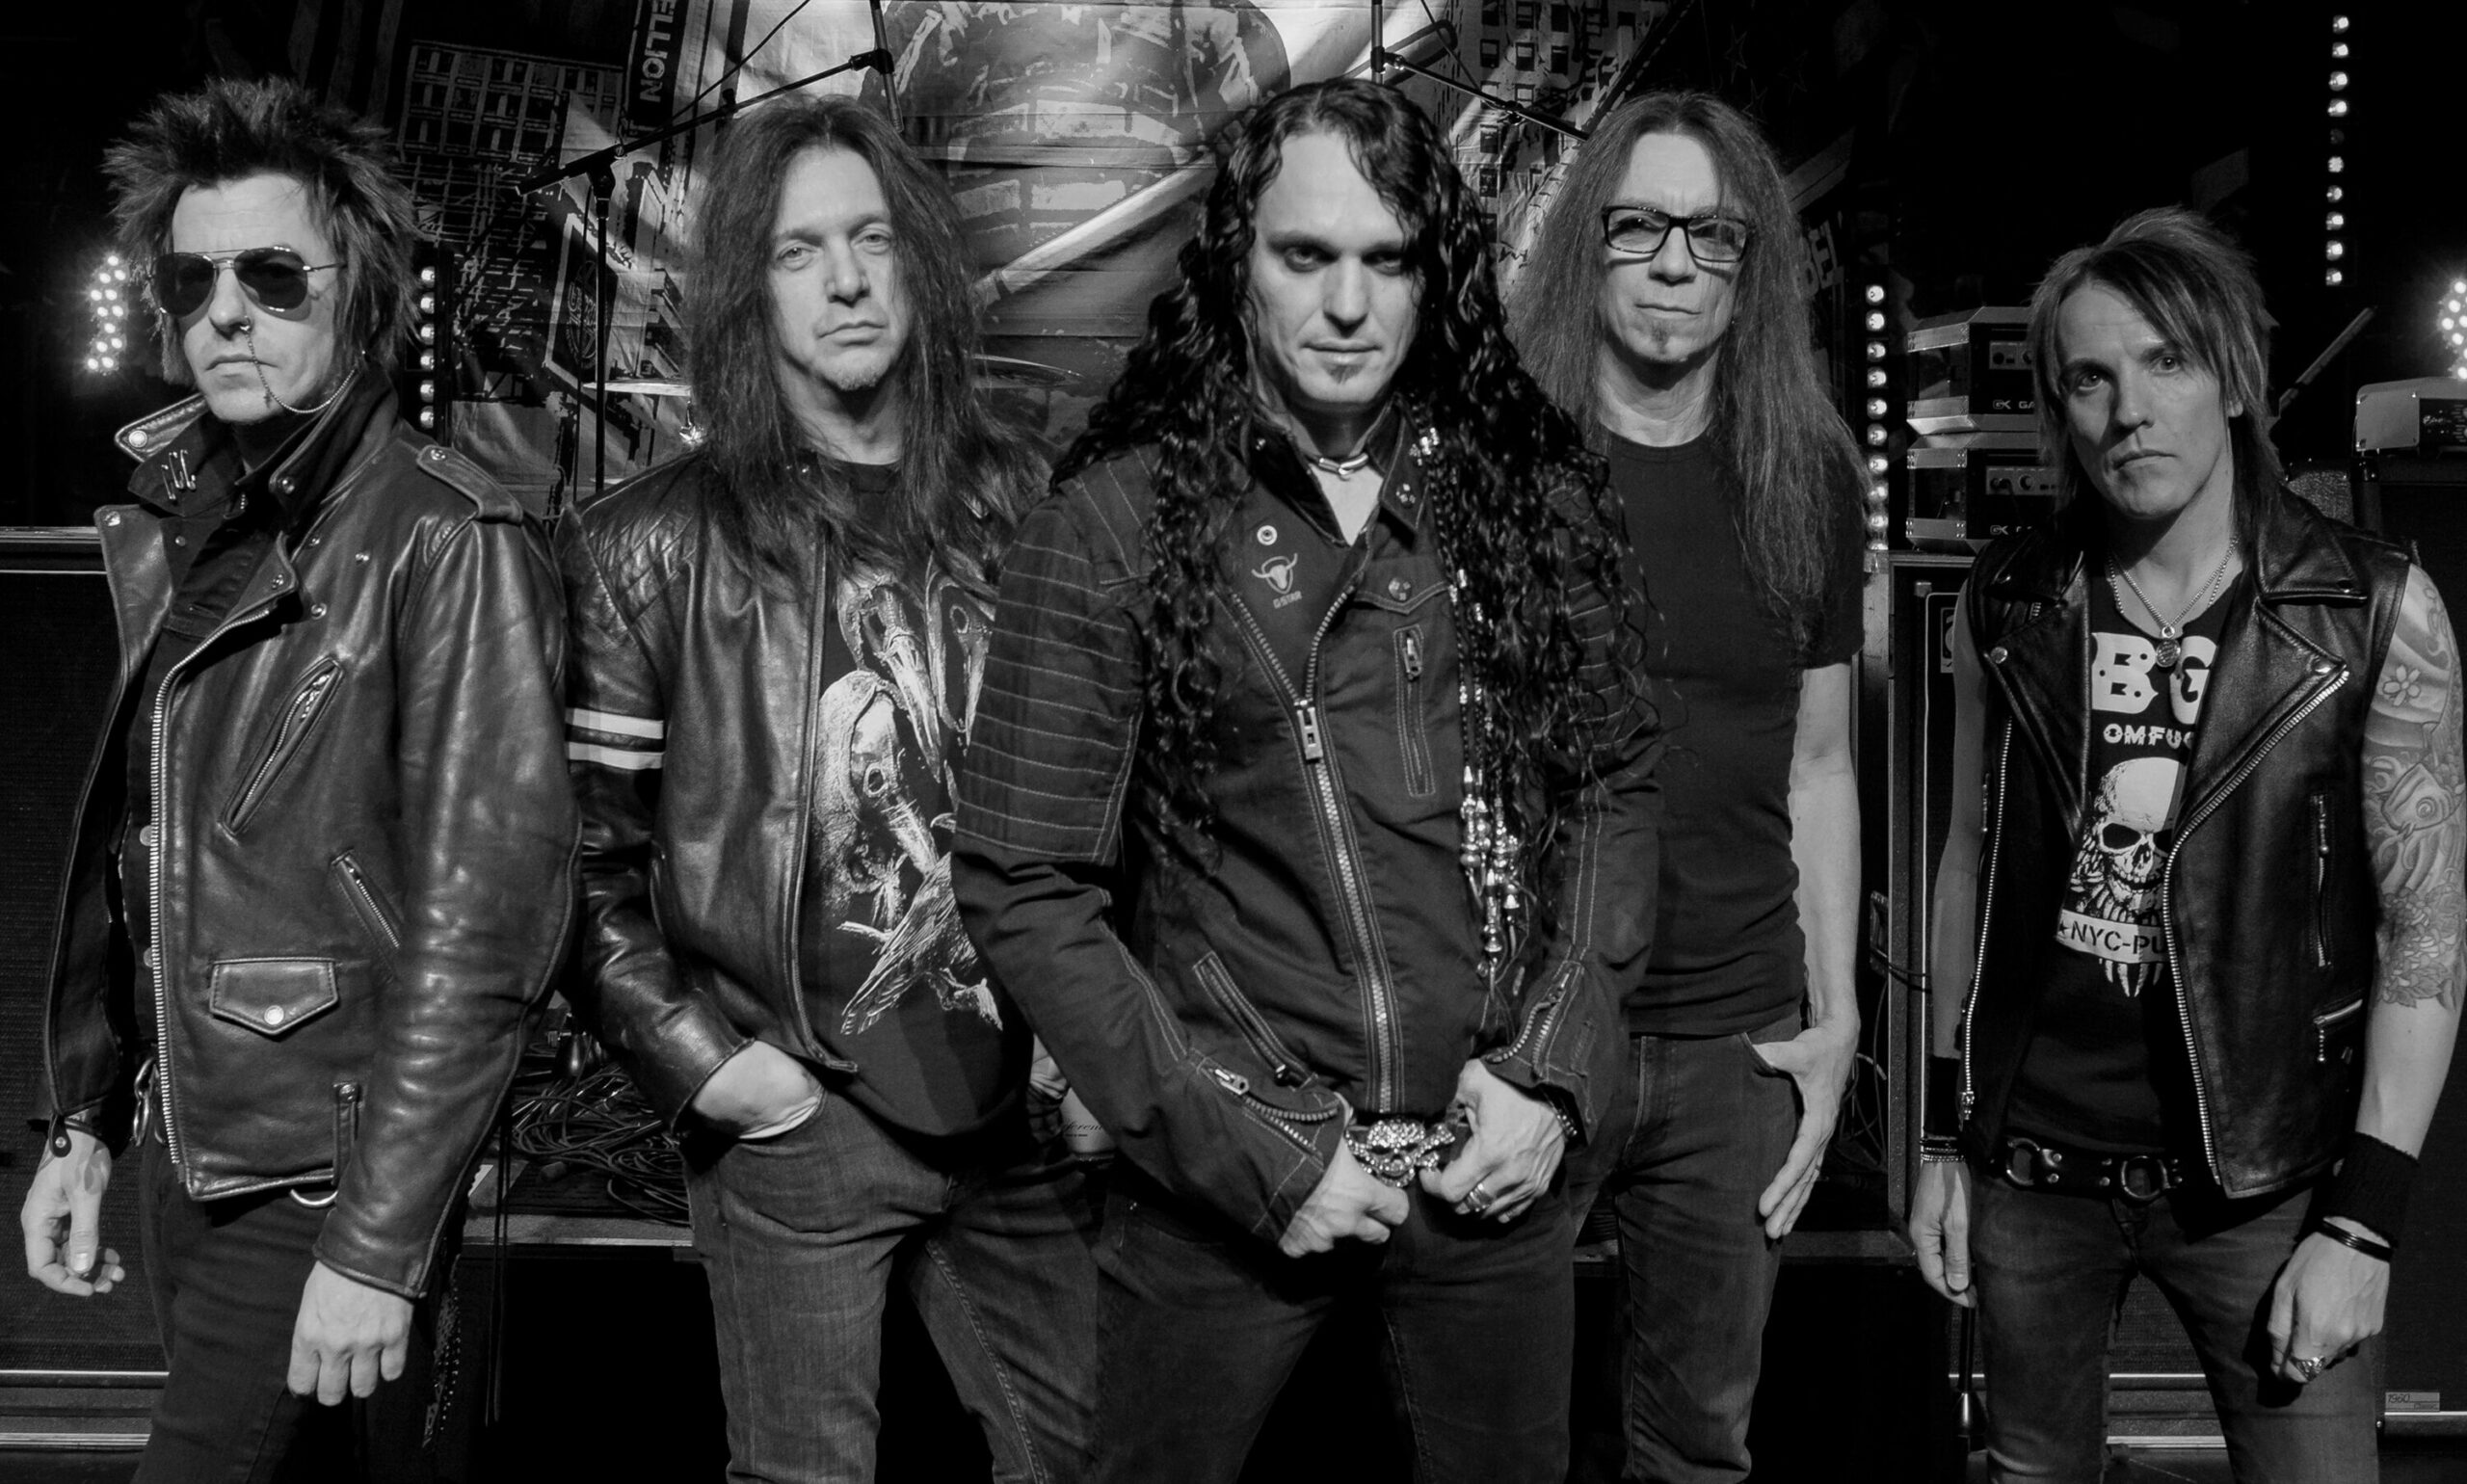 Skid Row’s new album gets release date, first single to arrive next month – Chaoszine